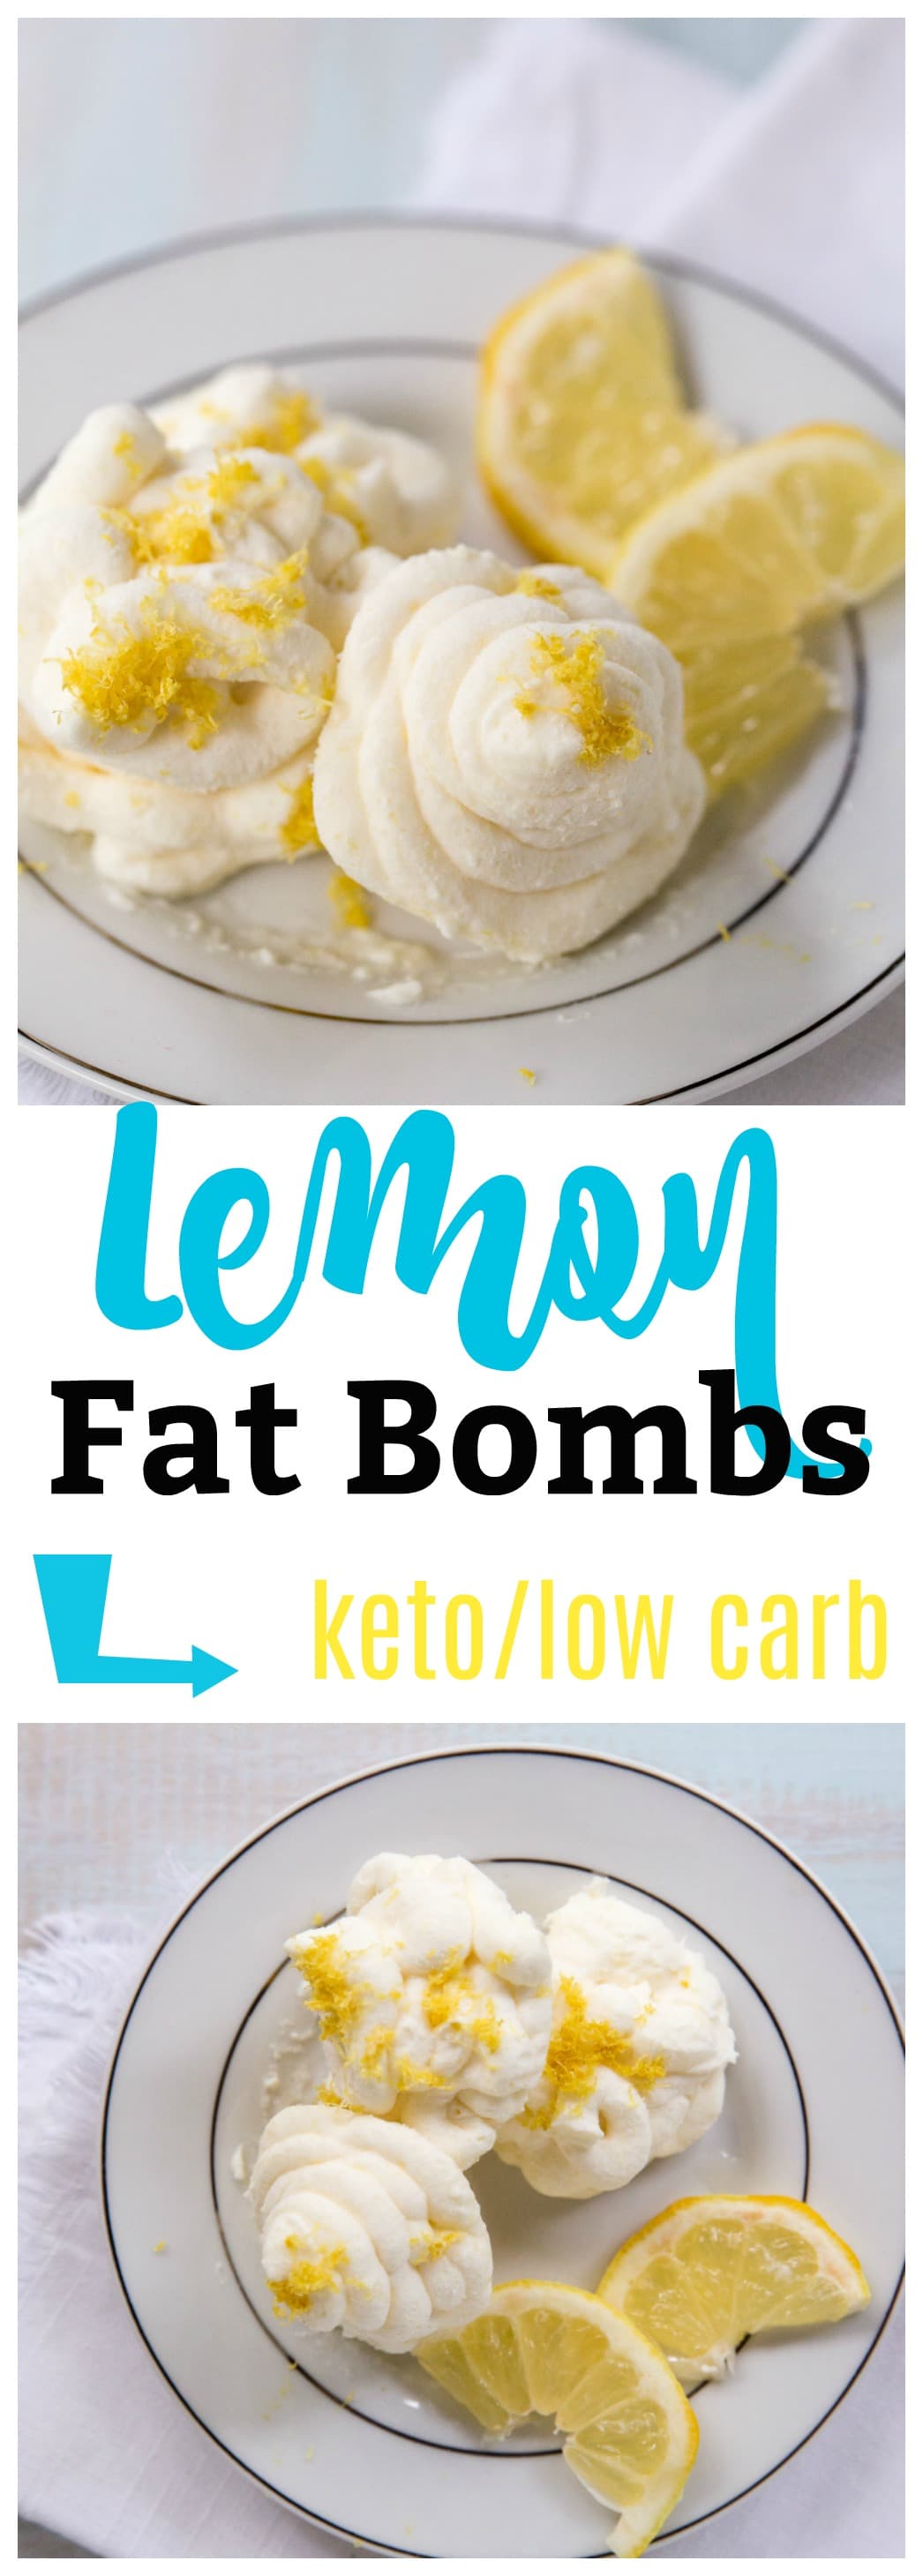 Lemon Keto Fat Bombs sitting on plate with text overlay that reads "lemon fat bombs keto/low carb"